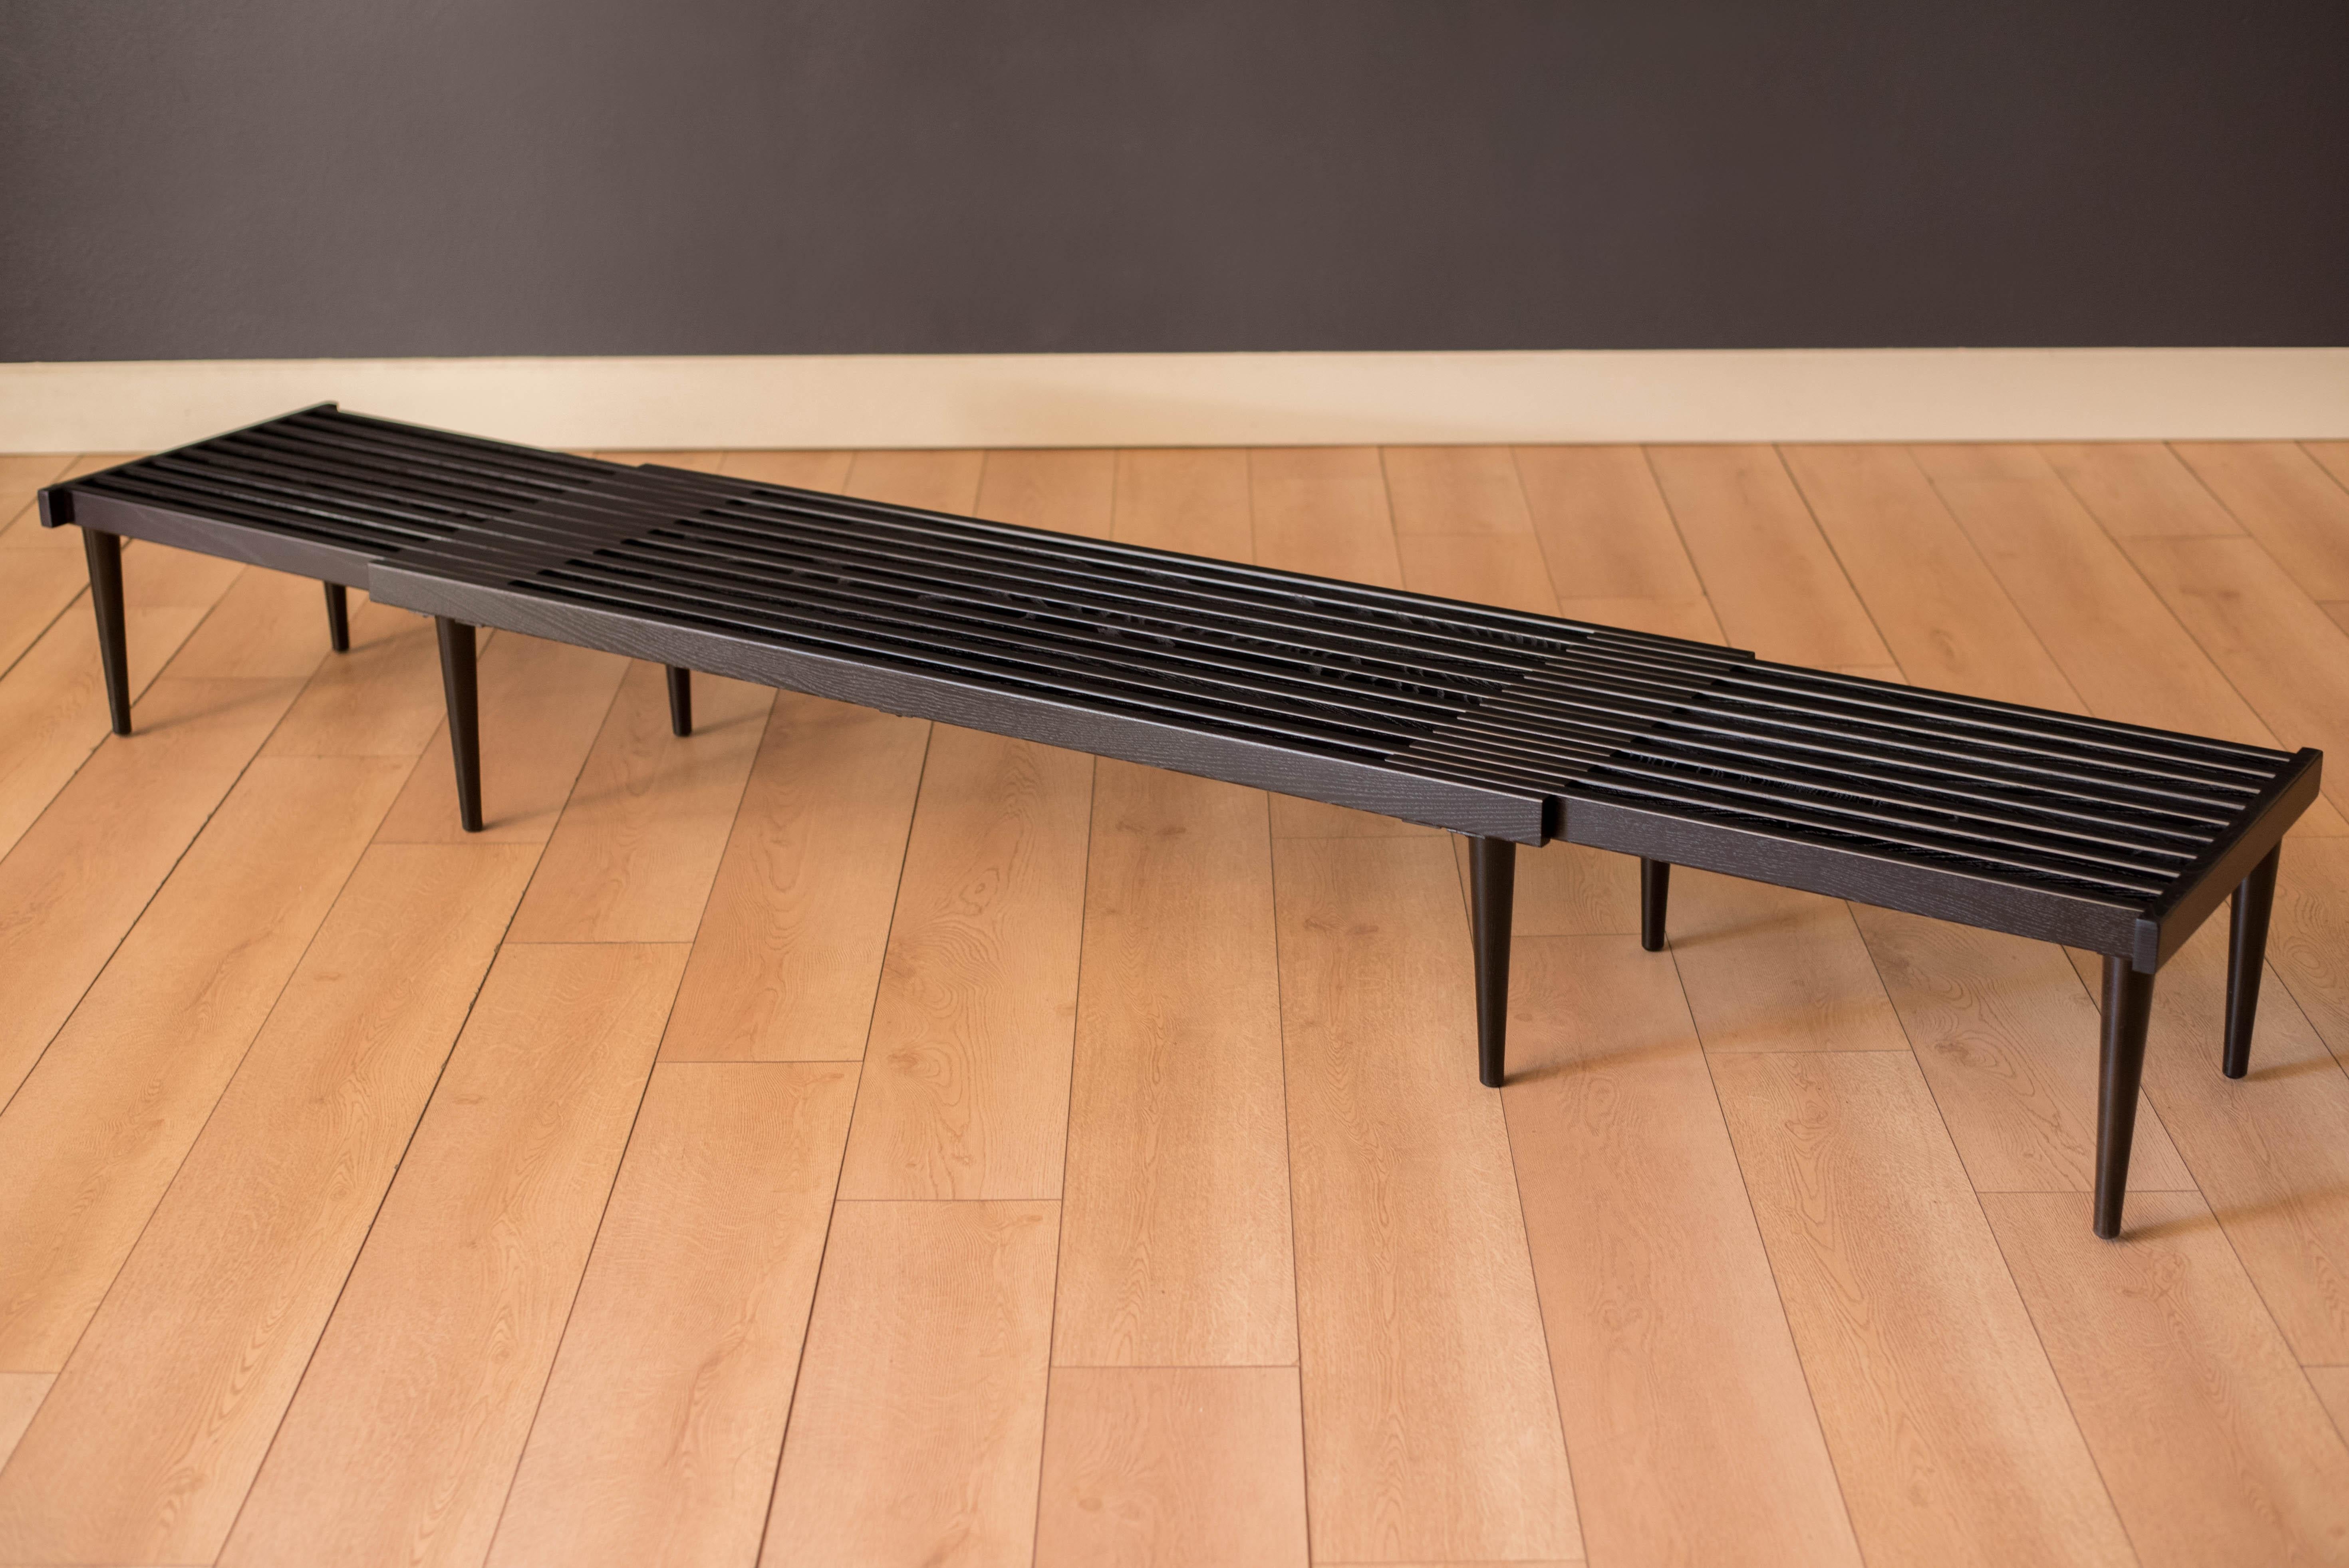 Mid century minimalist slat bench designed by John Keal for Brown Saltman. This versatile California modern piece features an expandable sliding top with eight support legs. Perfect to use as a living room coffee table, entryway or bedroom seating